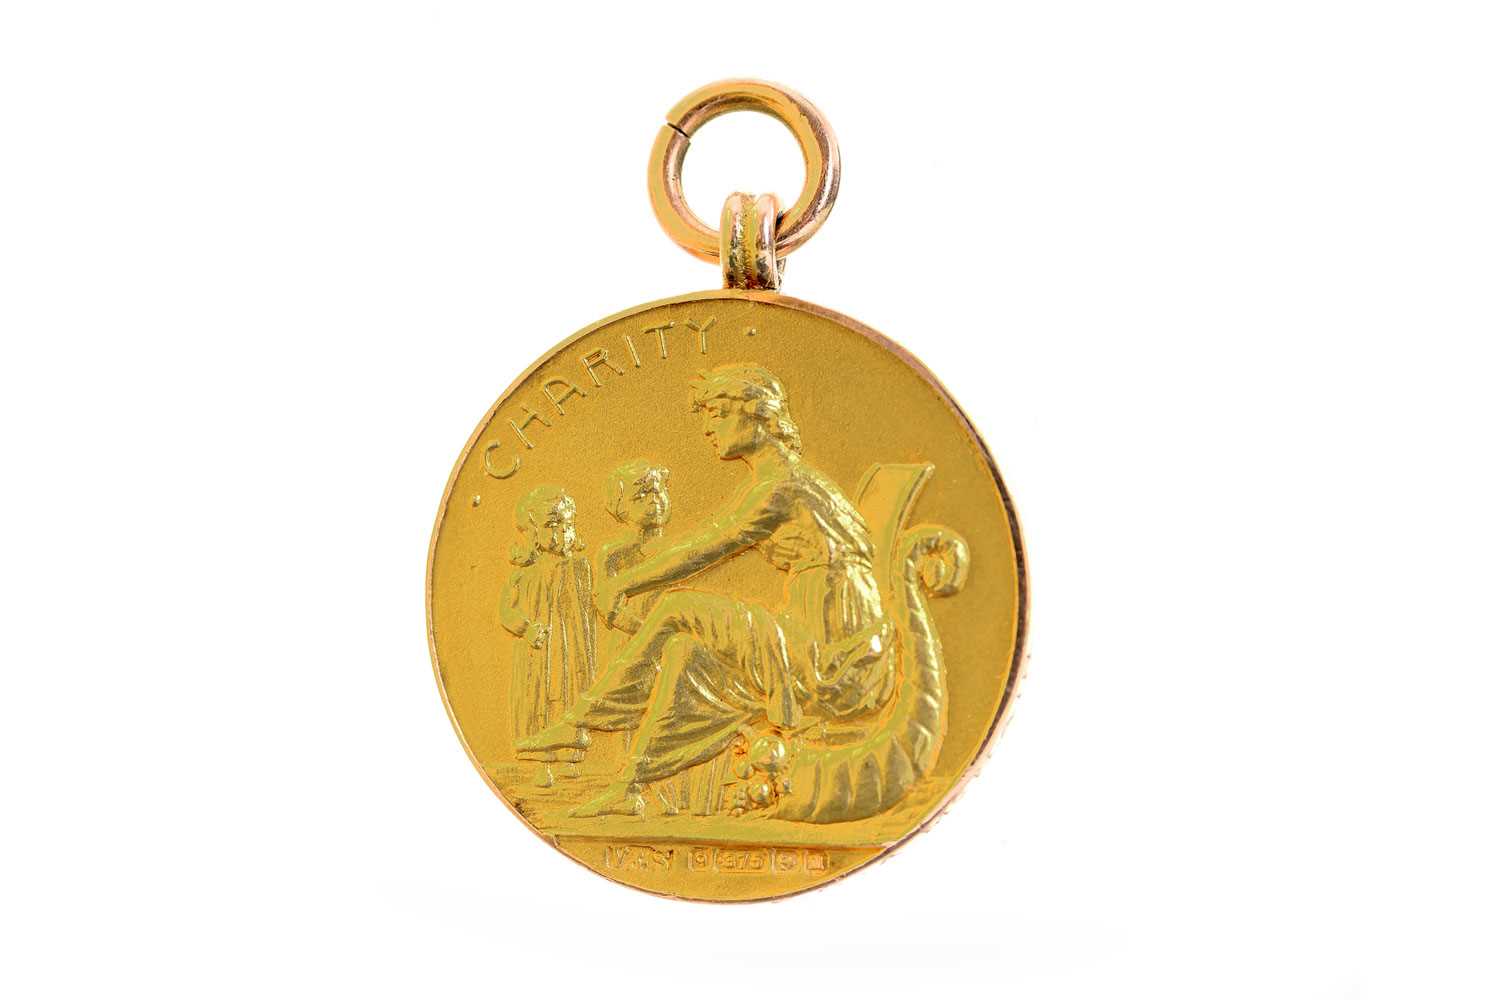 ALEC MCNAIR OF CELTIC F.C., GLASGOW CHARITY CUP WINNERS GOLD MEDAL, 1912 - Image 2 of 2